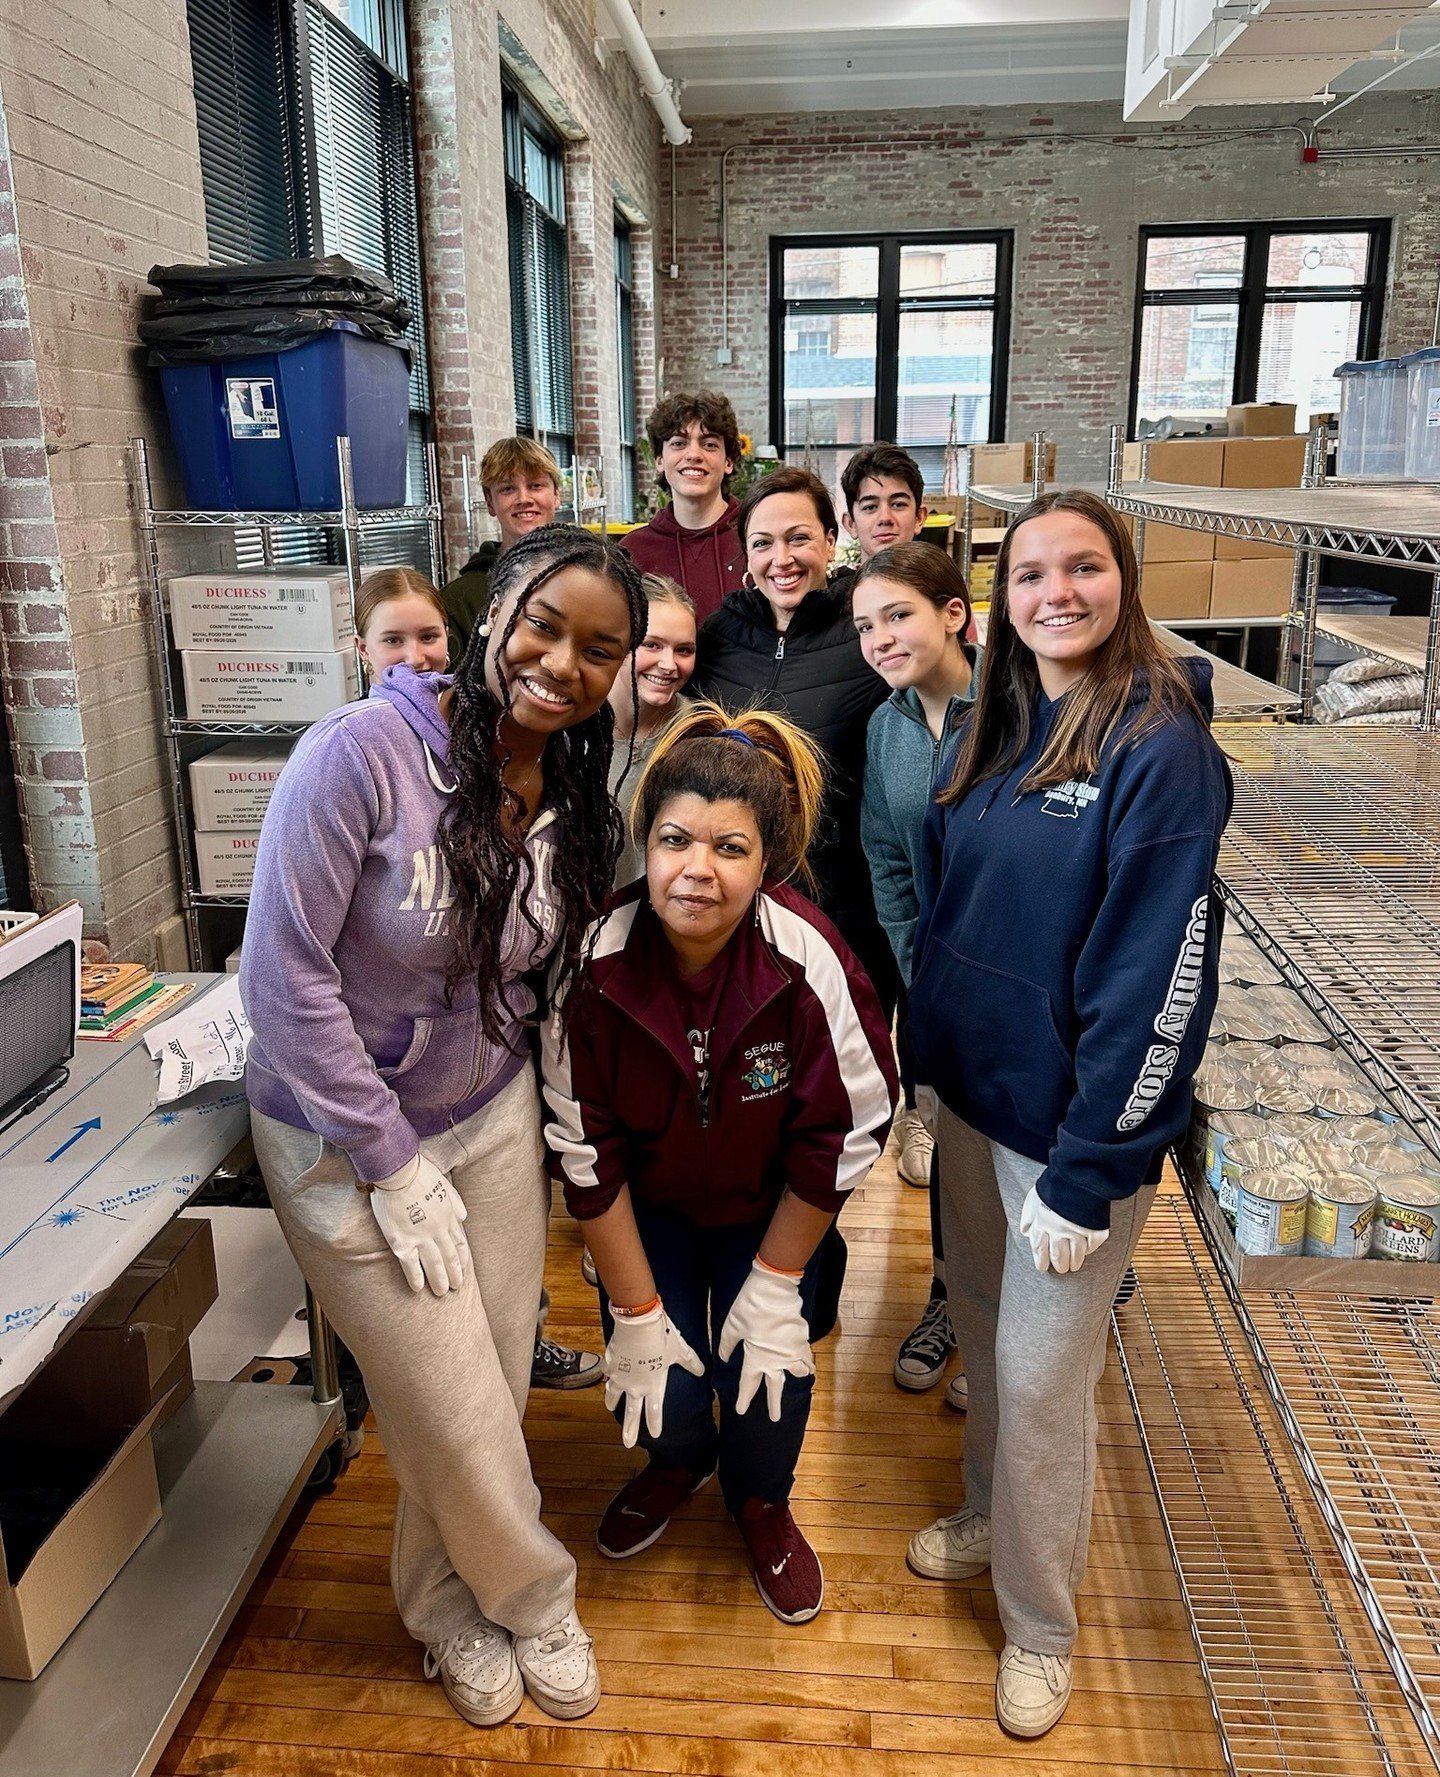 Alison visiting the students from @MosesBrownSchool who are helping out at the food pantry with Maria from the Segue Institute of Learning, our neighbors at Shri in Pawtucket 💕